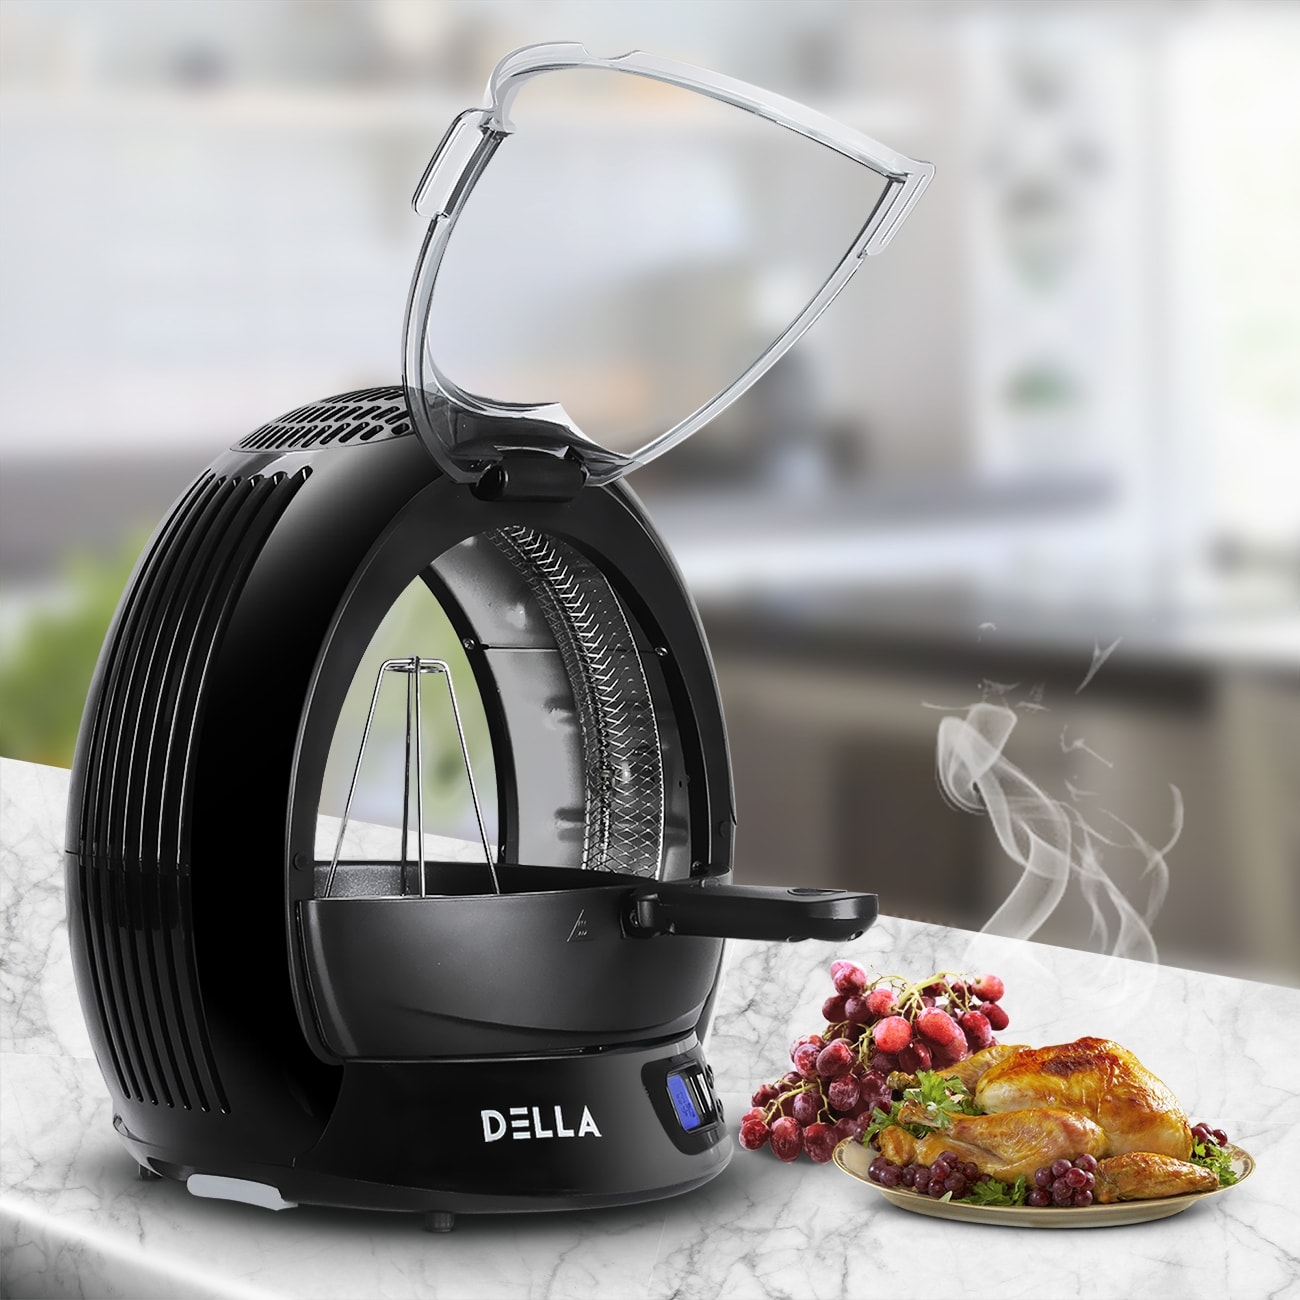 Discover the 2-in-1 Air Fryer and Grill